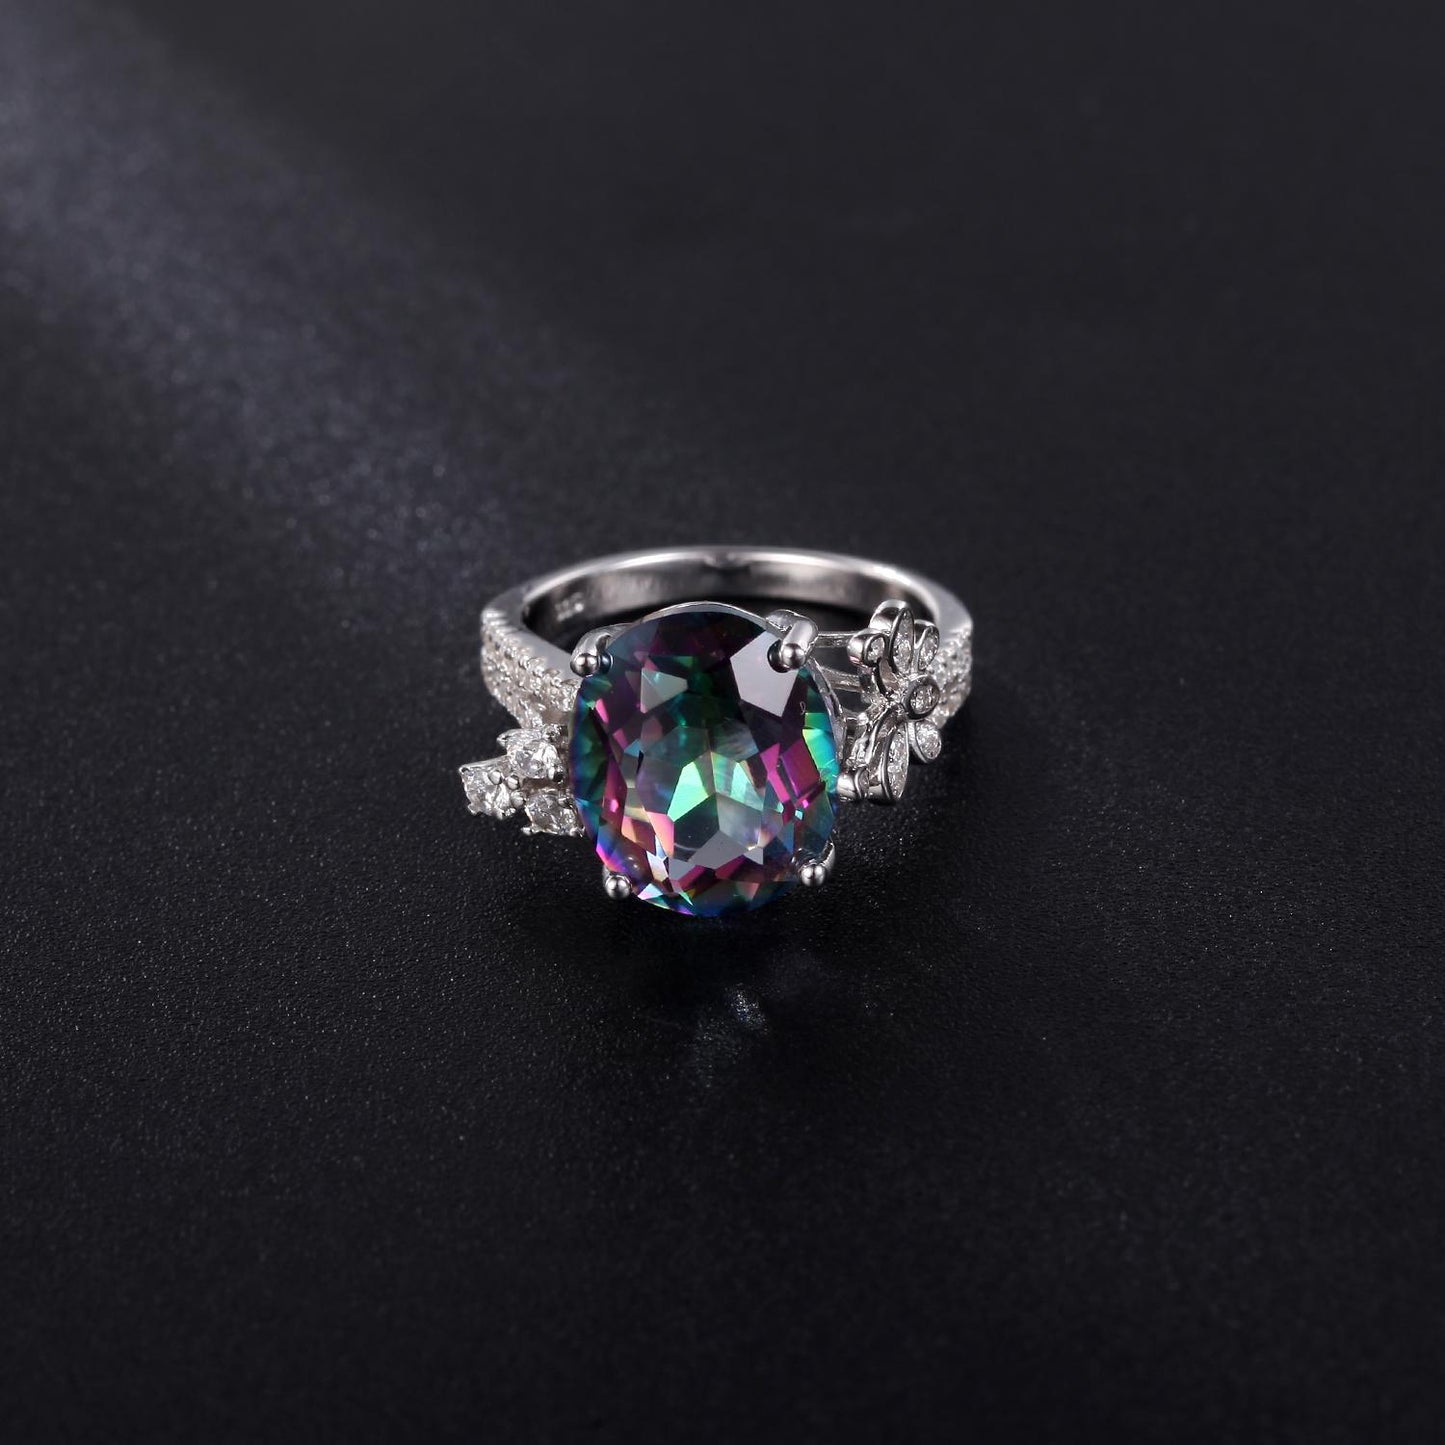 GEM&#39;S BALLET 4.36Ct 10x12mm Rainbow Mystic Topaz Gemstone Antique Art Rings in Sterling Silver with Laurel Leaves Gift For Her